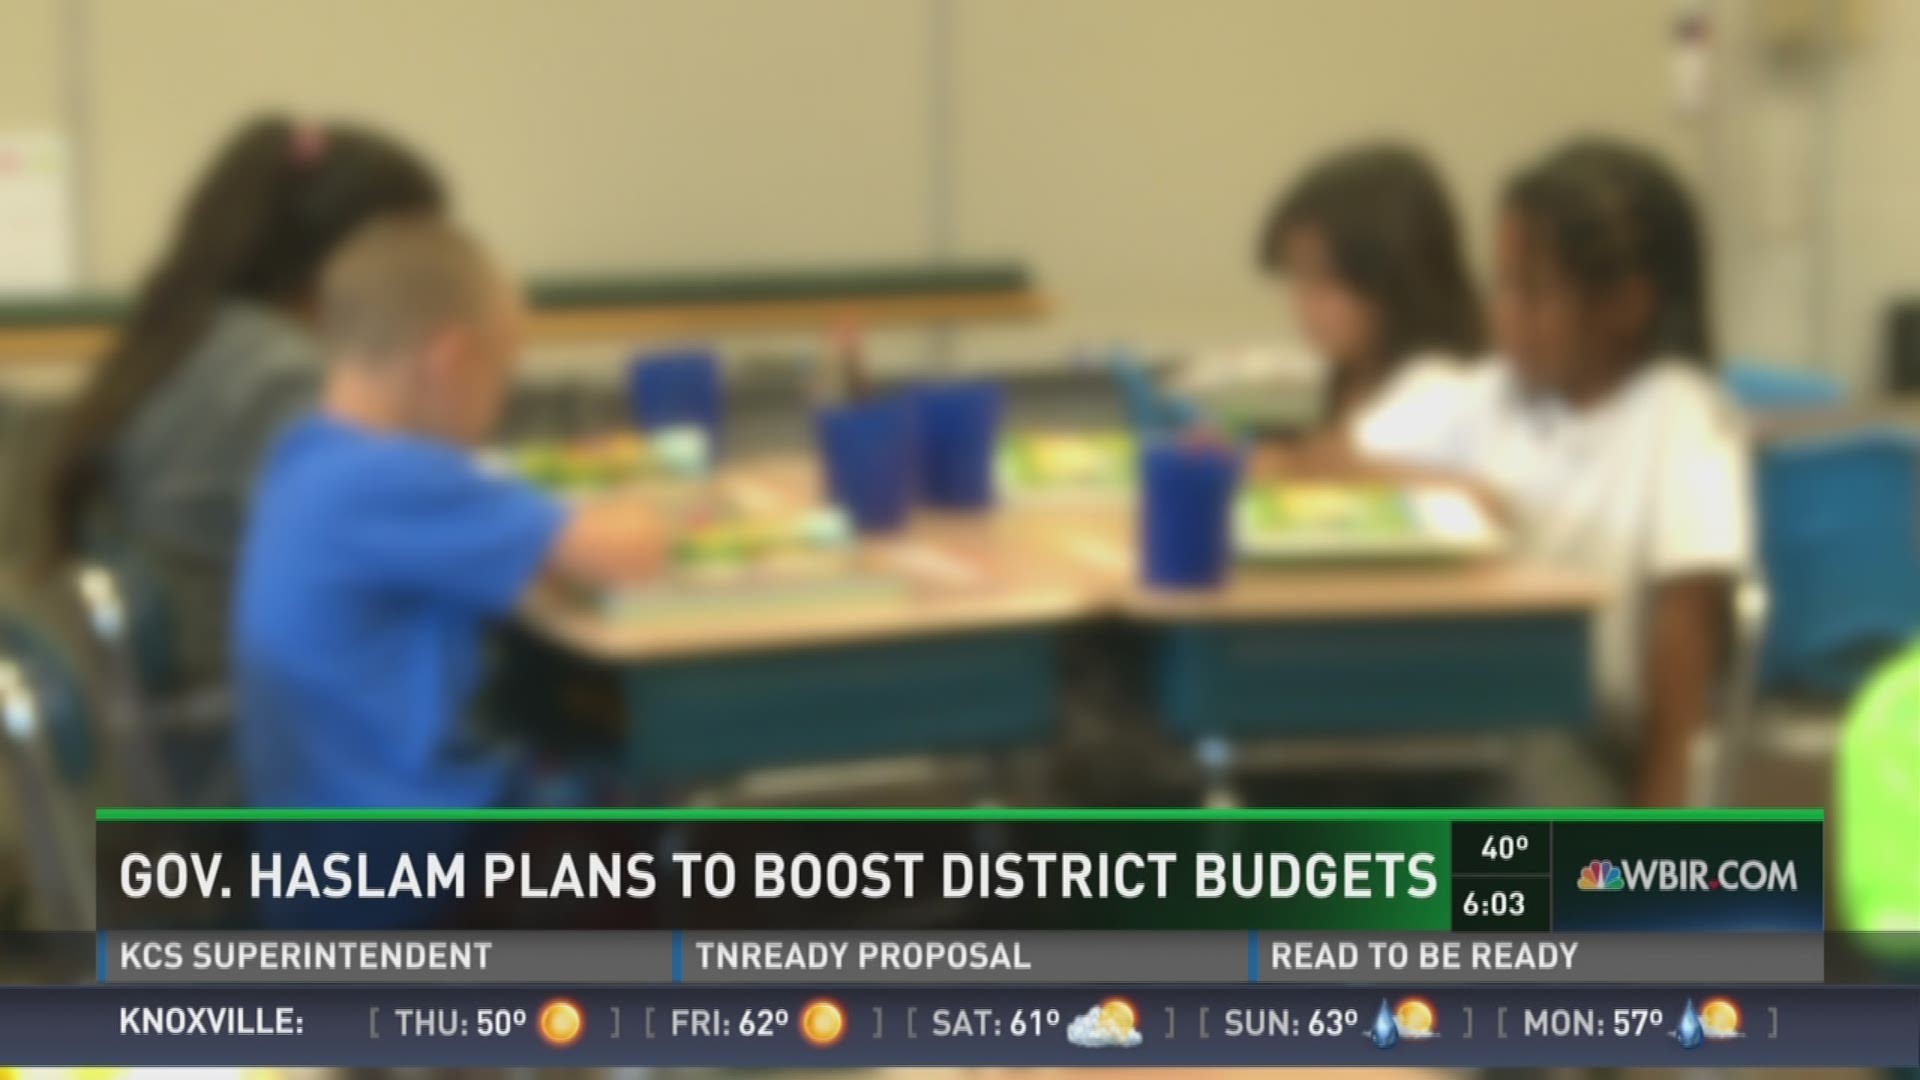 The governor�s office is expected to allocate an additional $13.2 million in Basic Education Program, or BEP, funding to the Knox County Schools system. Several other districts will also get a boost.